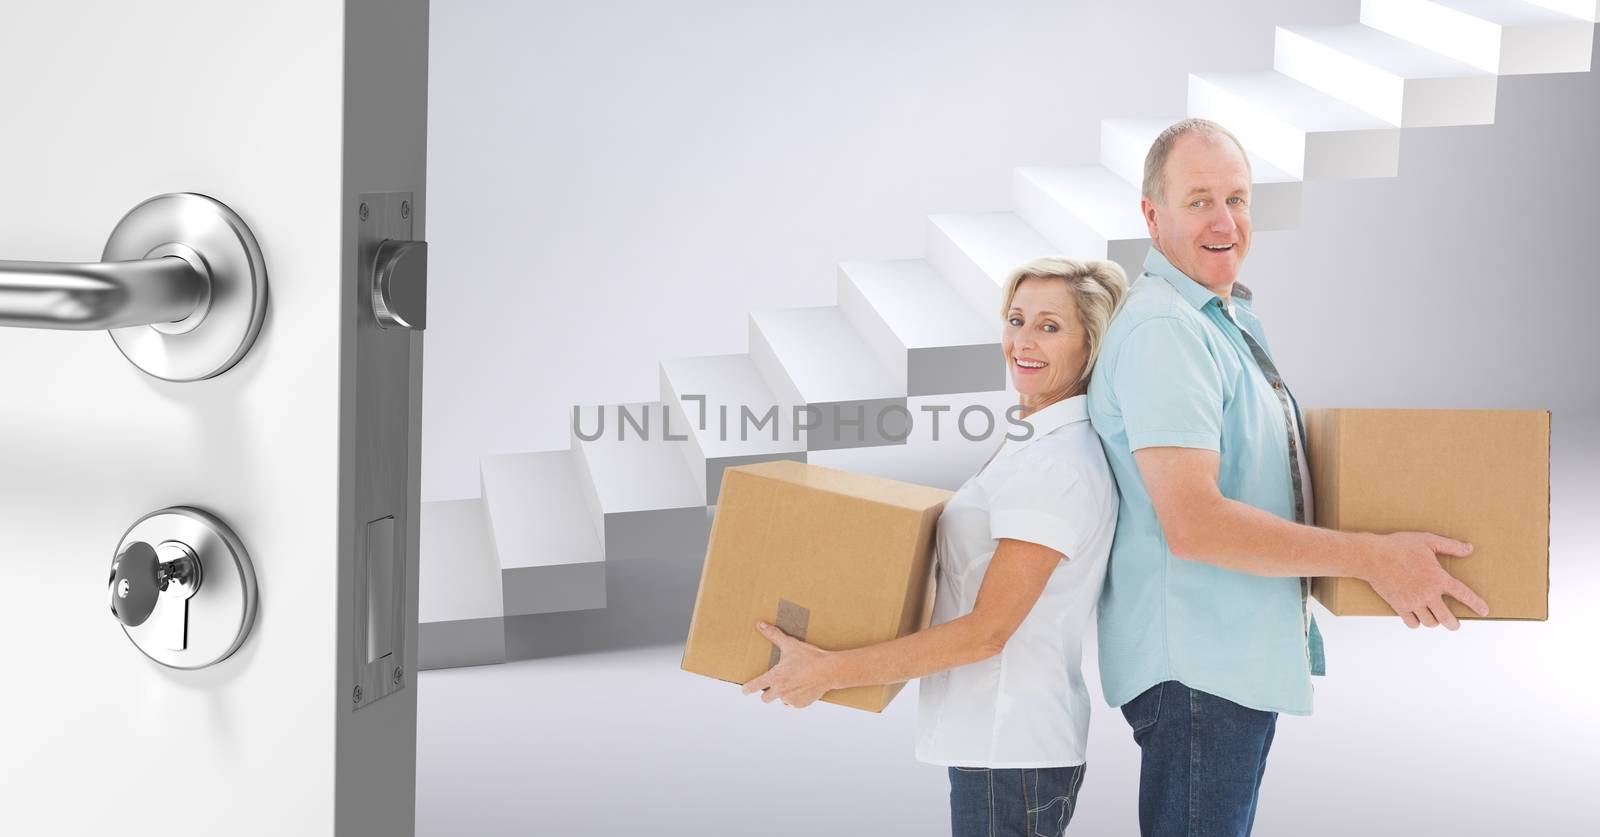 Digital composite of people moving boxes into new home